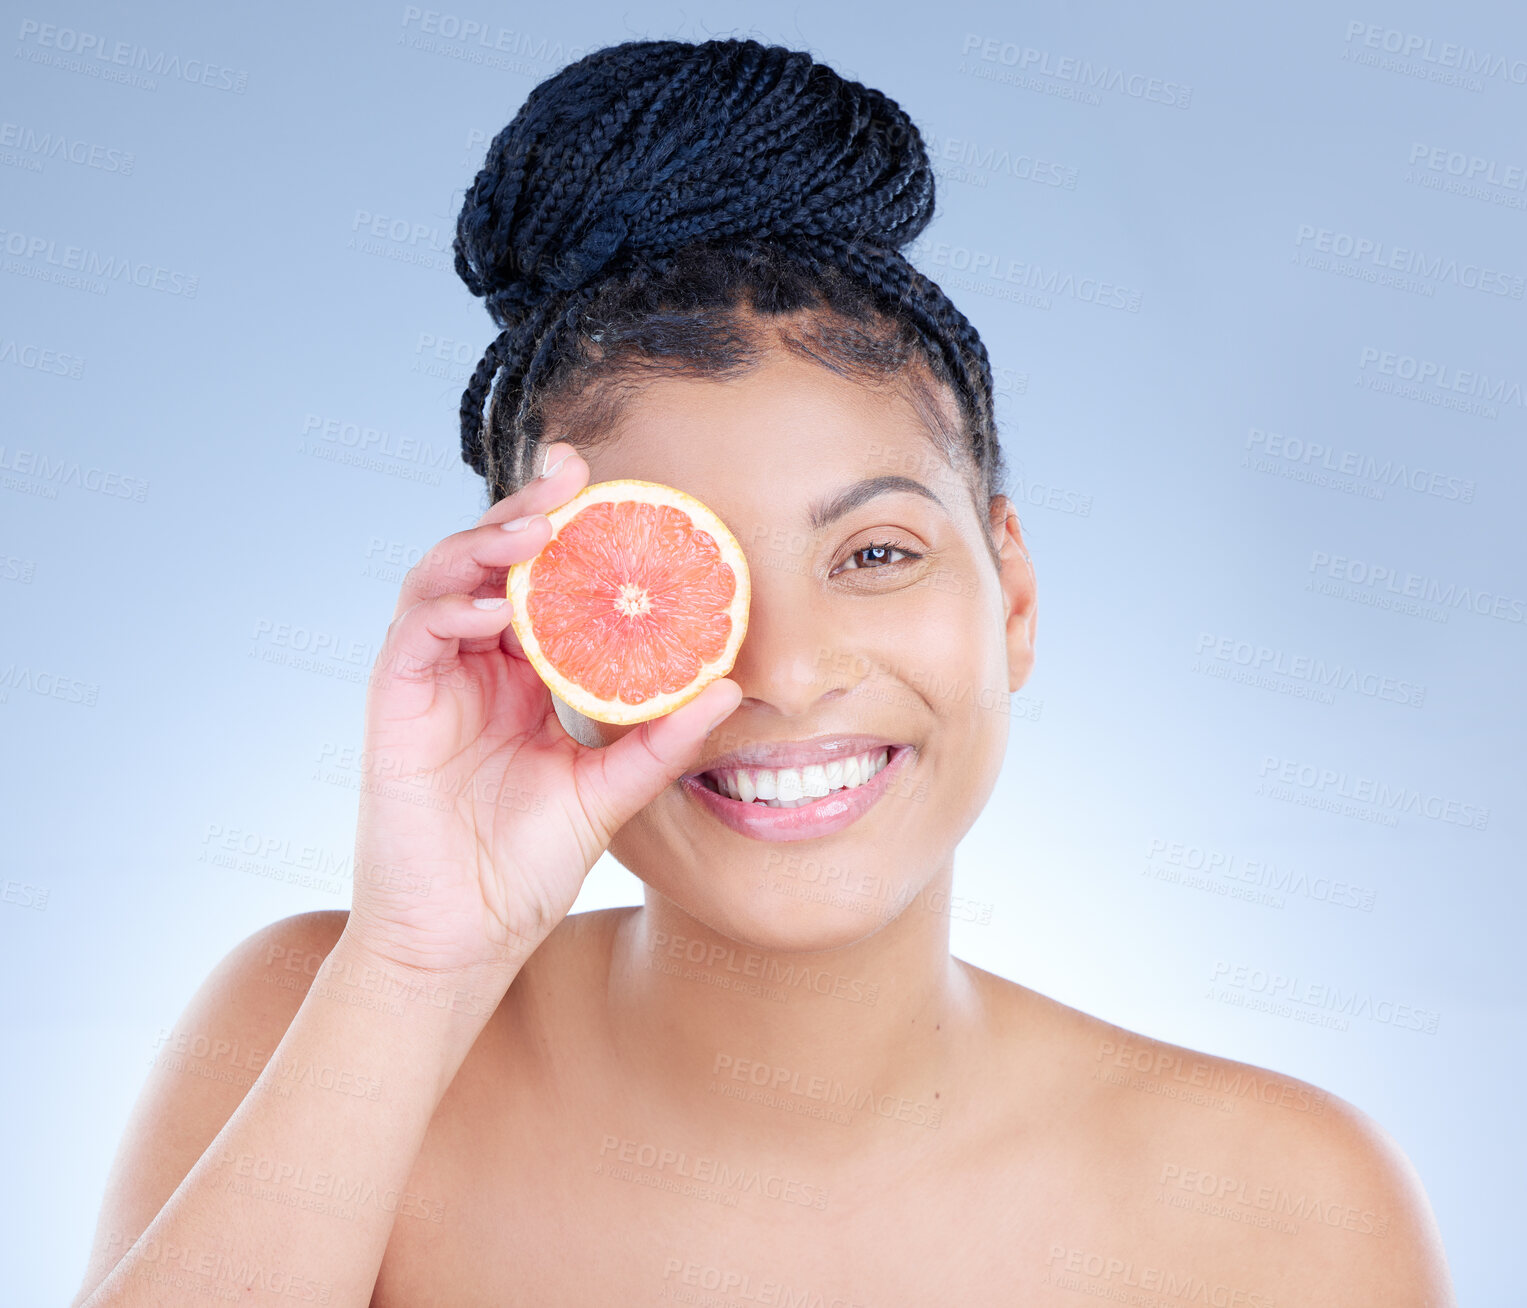 Buy stock photo Studio portrait of an attractive young woman holding a sliced grapefruit against a blue background